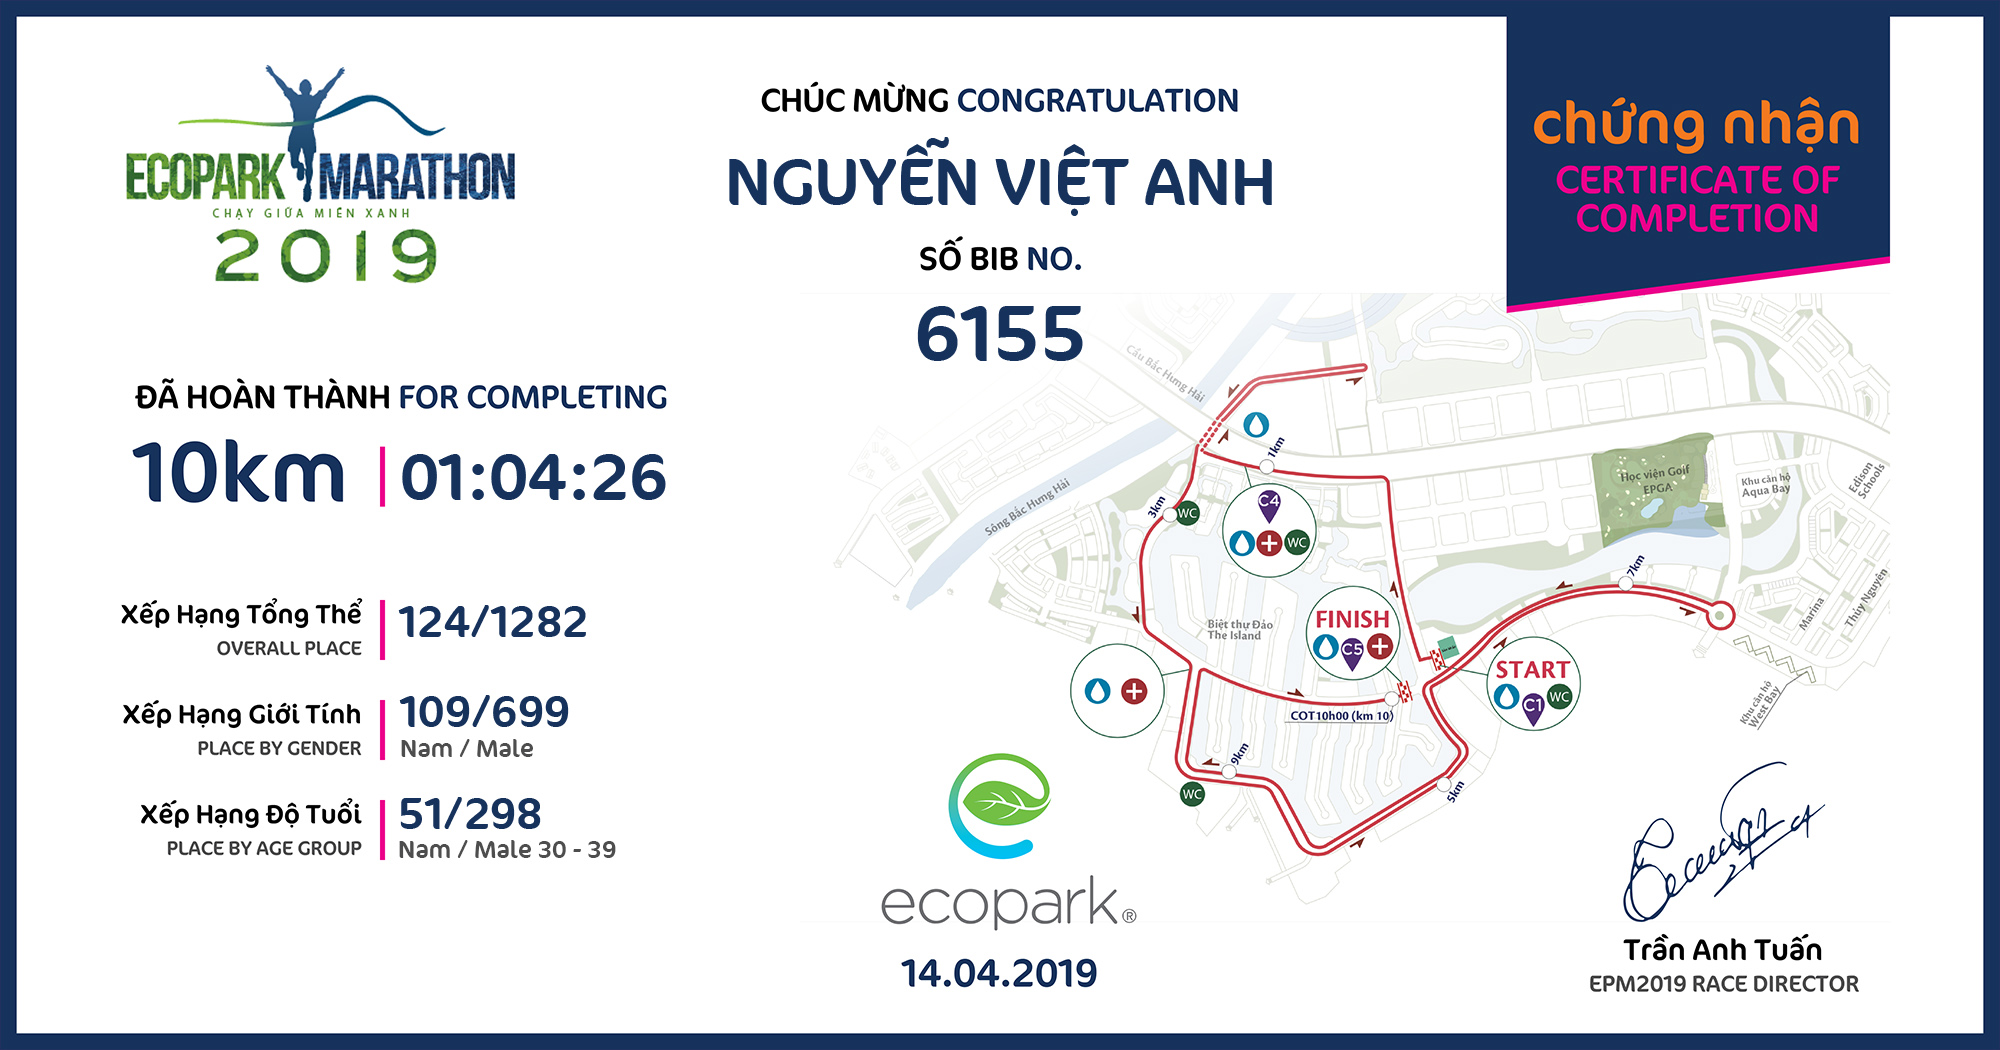 6155 - Nguyễn Việt Anh